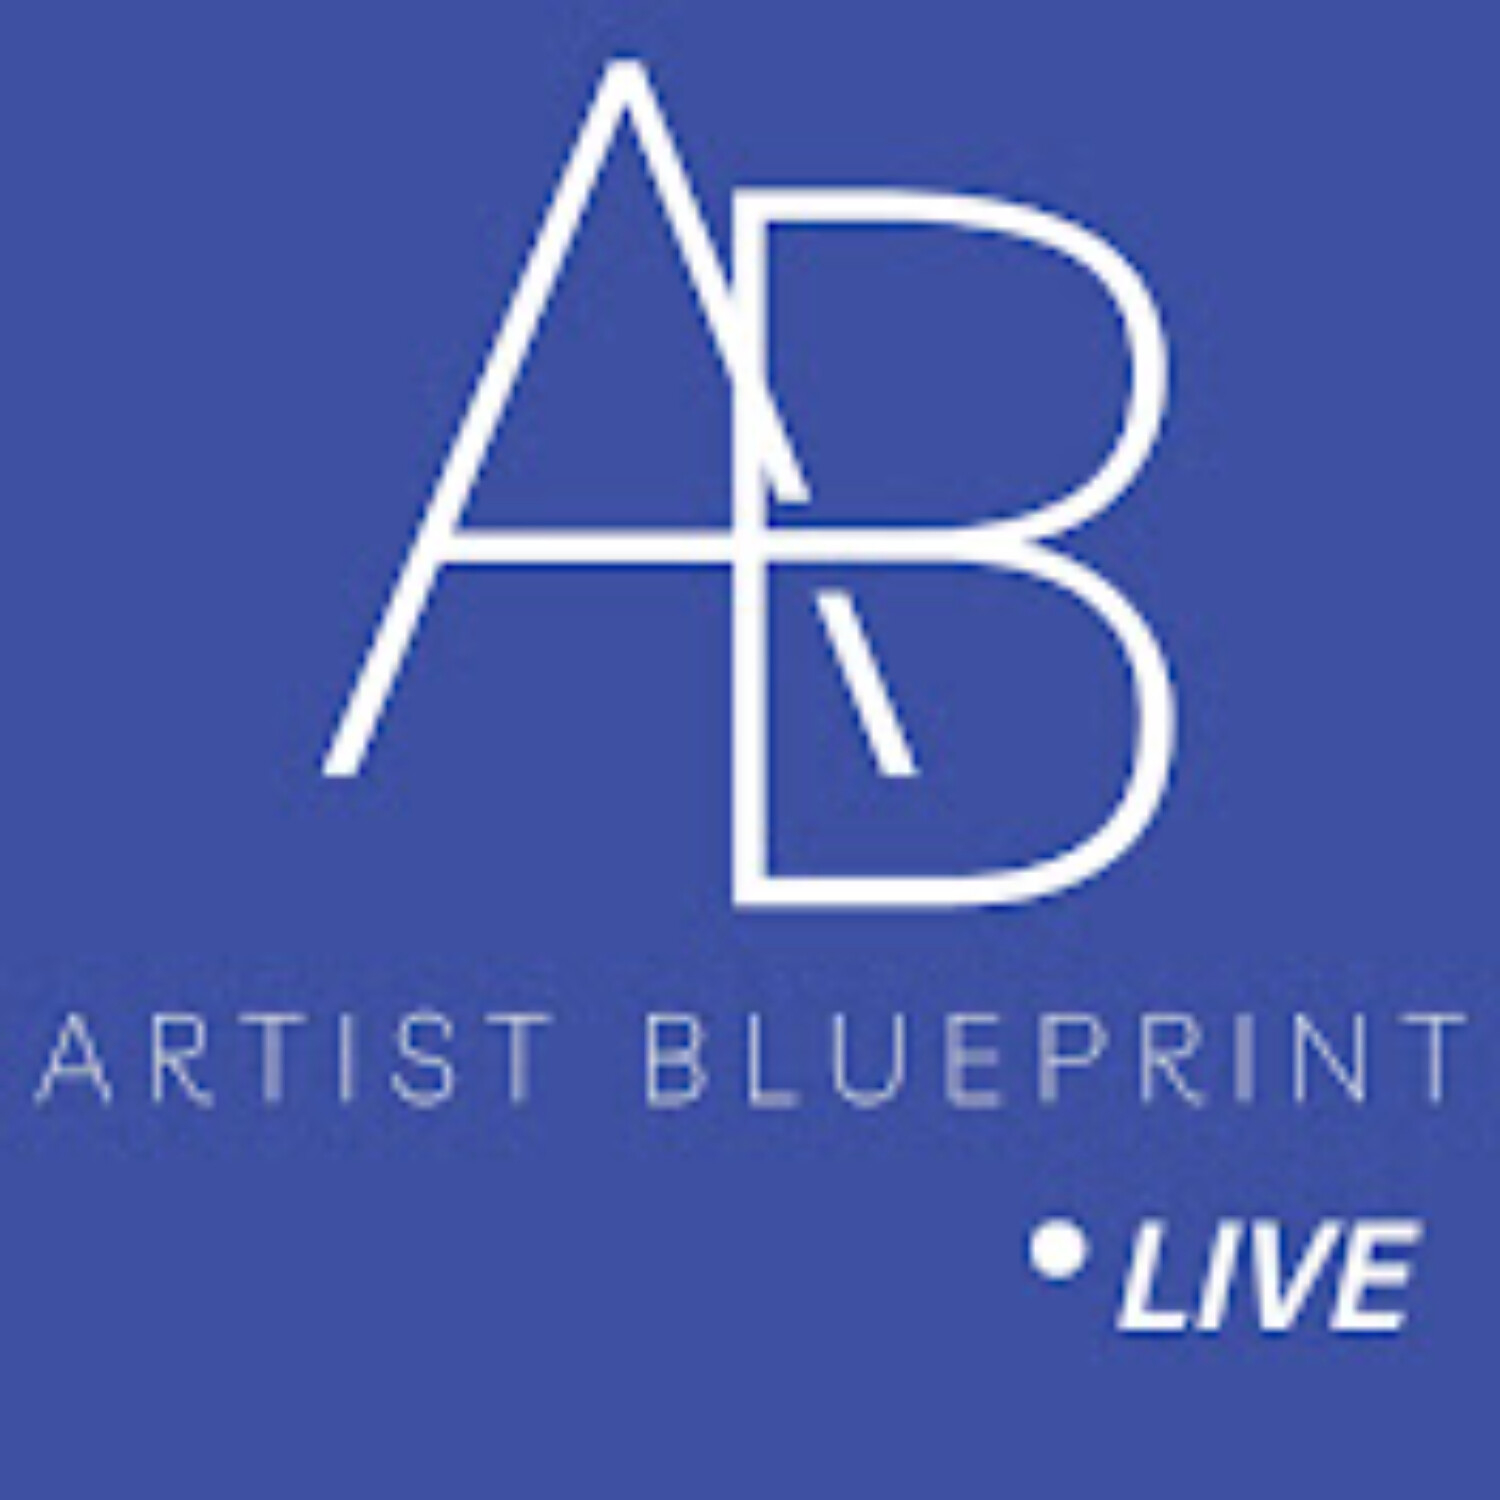 The Artist Blueprint Journey with John Henry Soto and George Batista